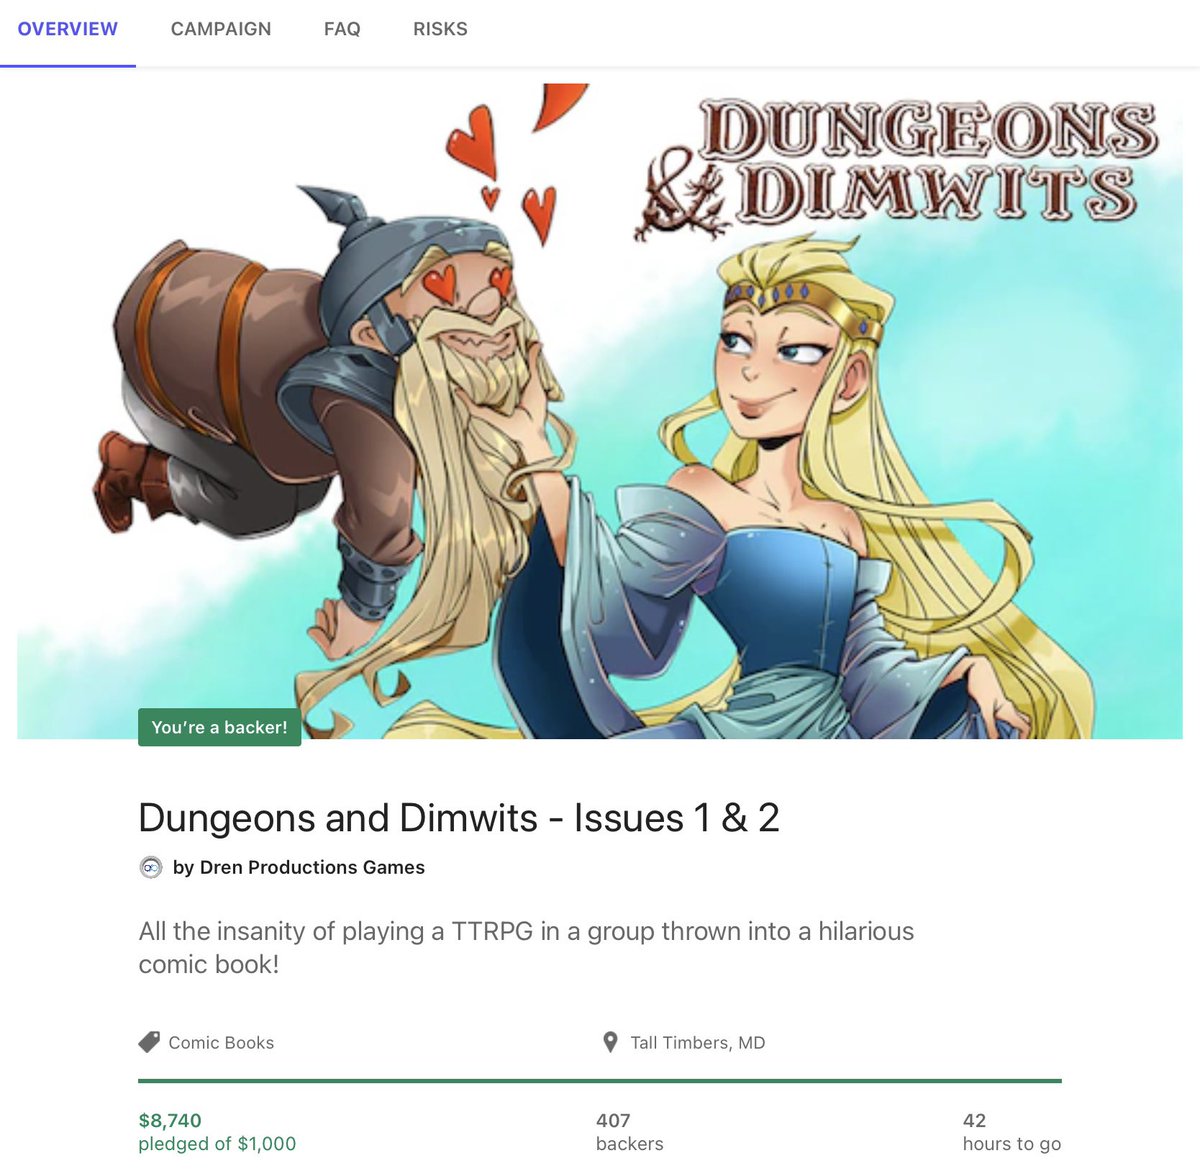 Only a few hours to go! I have the honor of creating one of the alternate covers. Check it out on #Kickstarter. #dungeonsanddimwits 
By @drenproductions
#indiecomics #comicbooks #comics
kickstarter.com/projects/drenp…